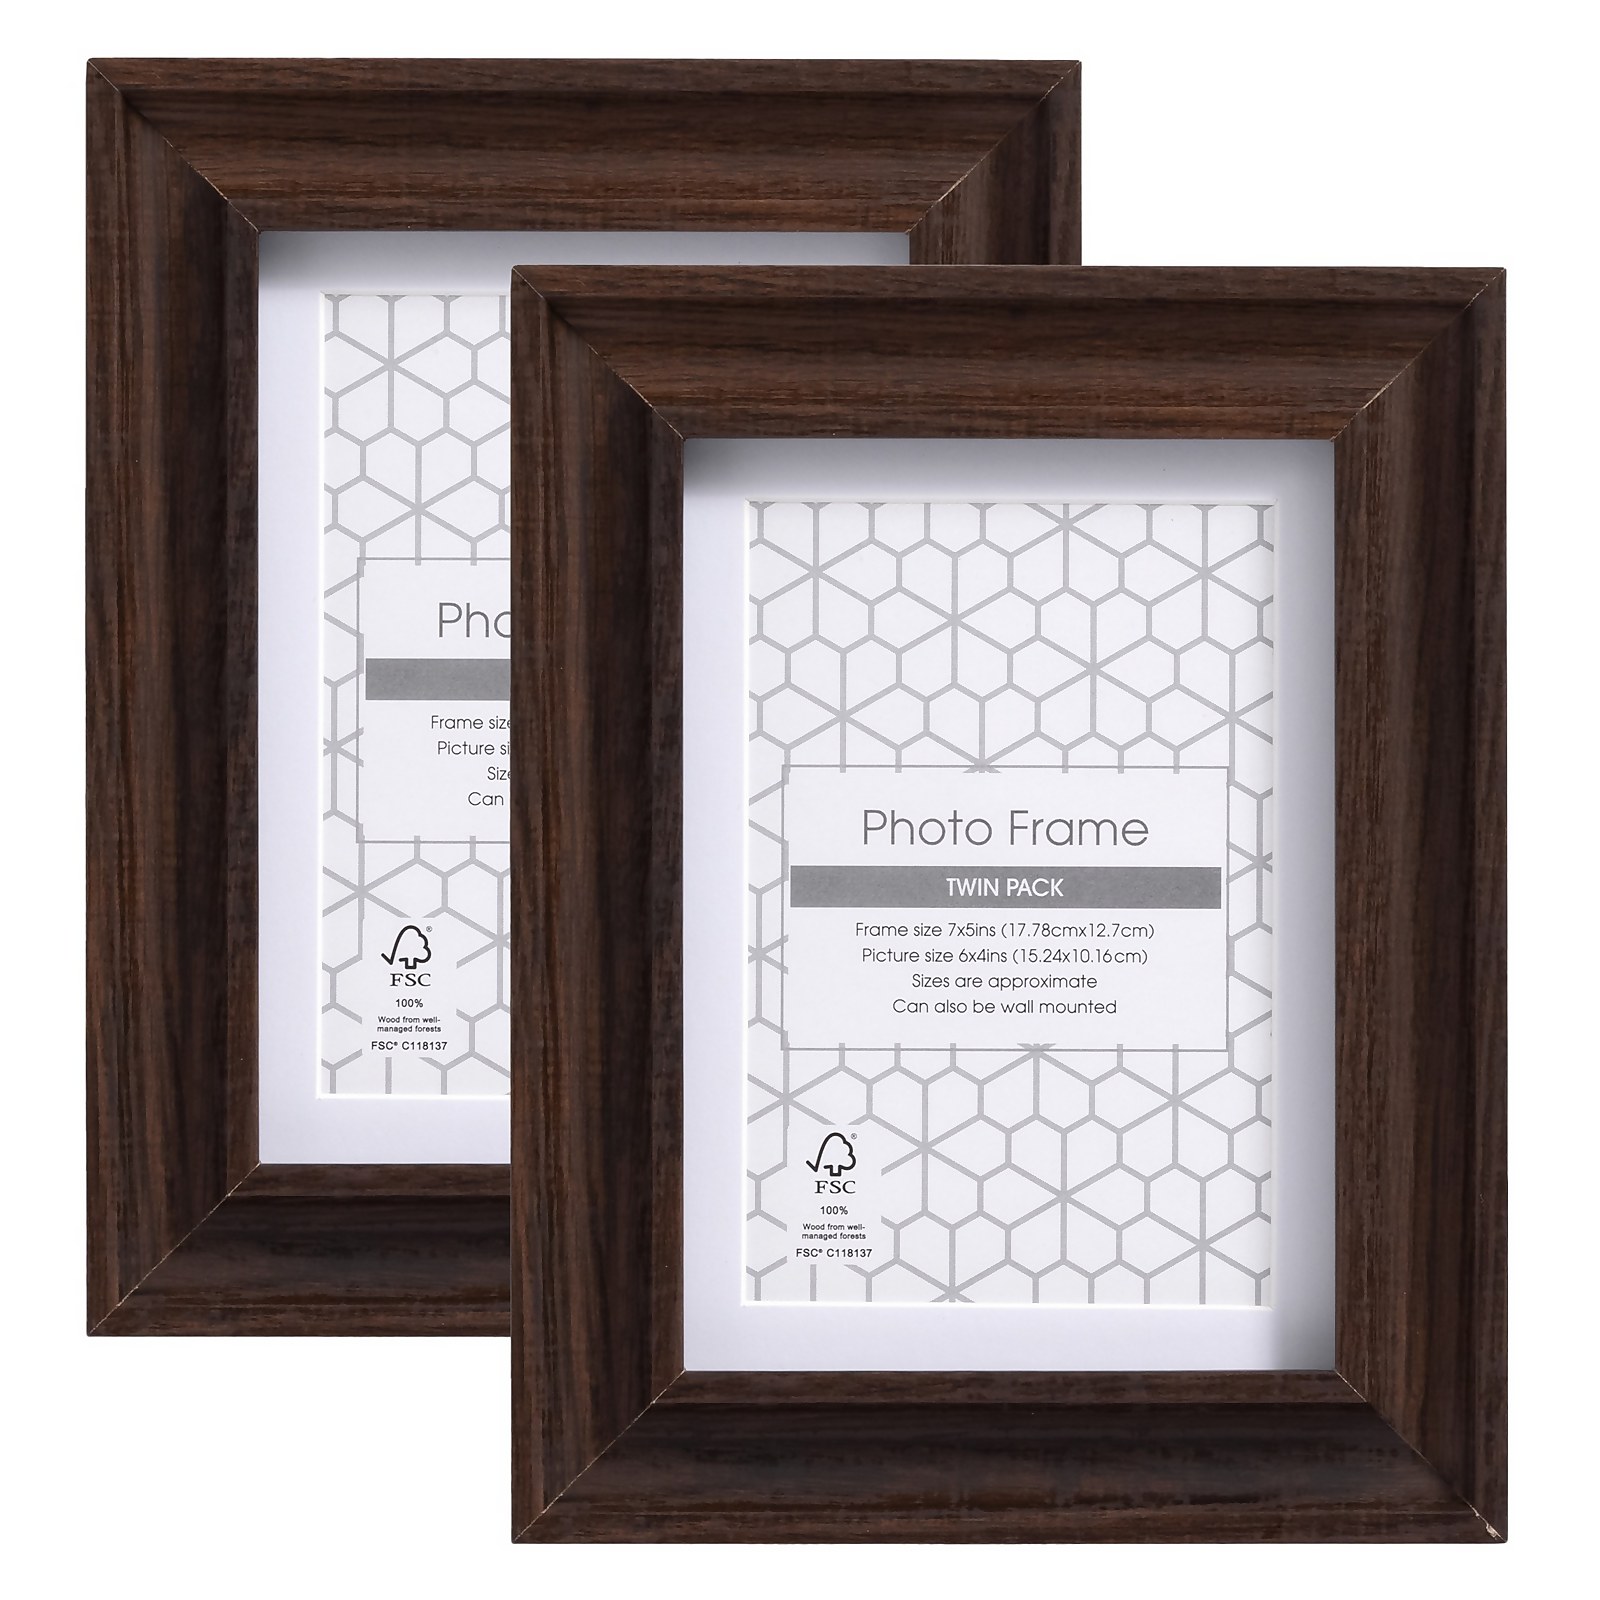 Photo of Twin Pack Of Photo Frames - Walnut - 6x4in